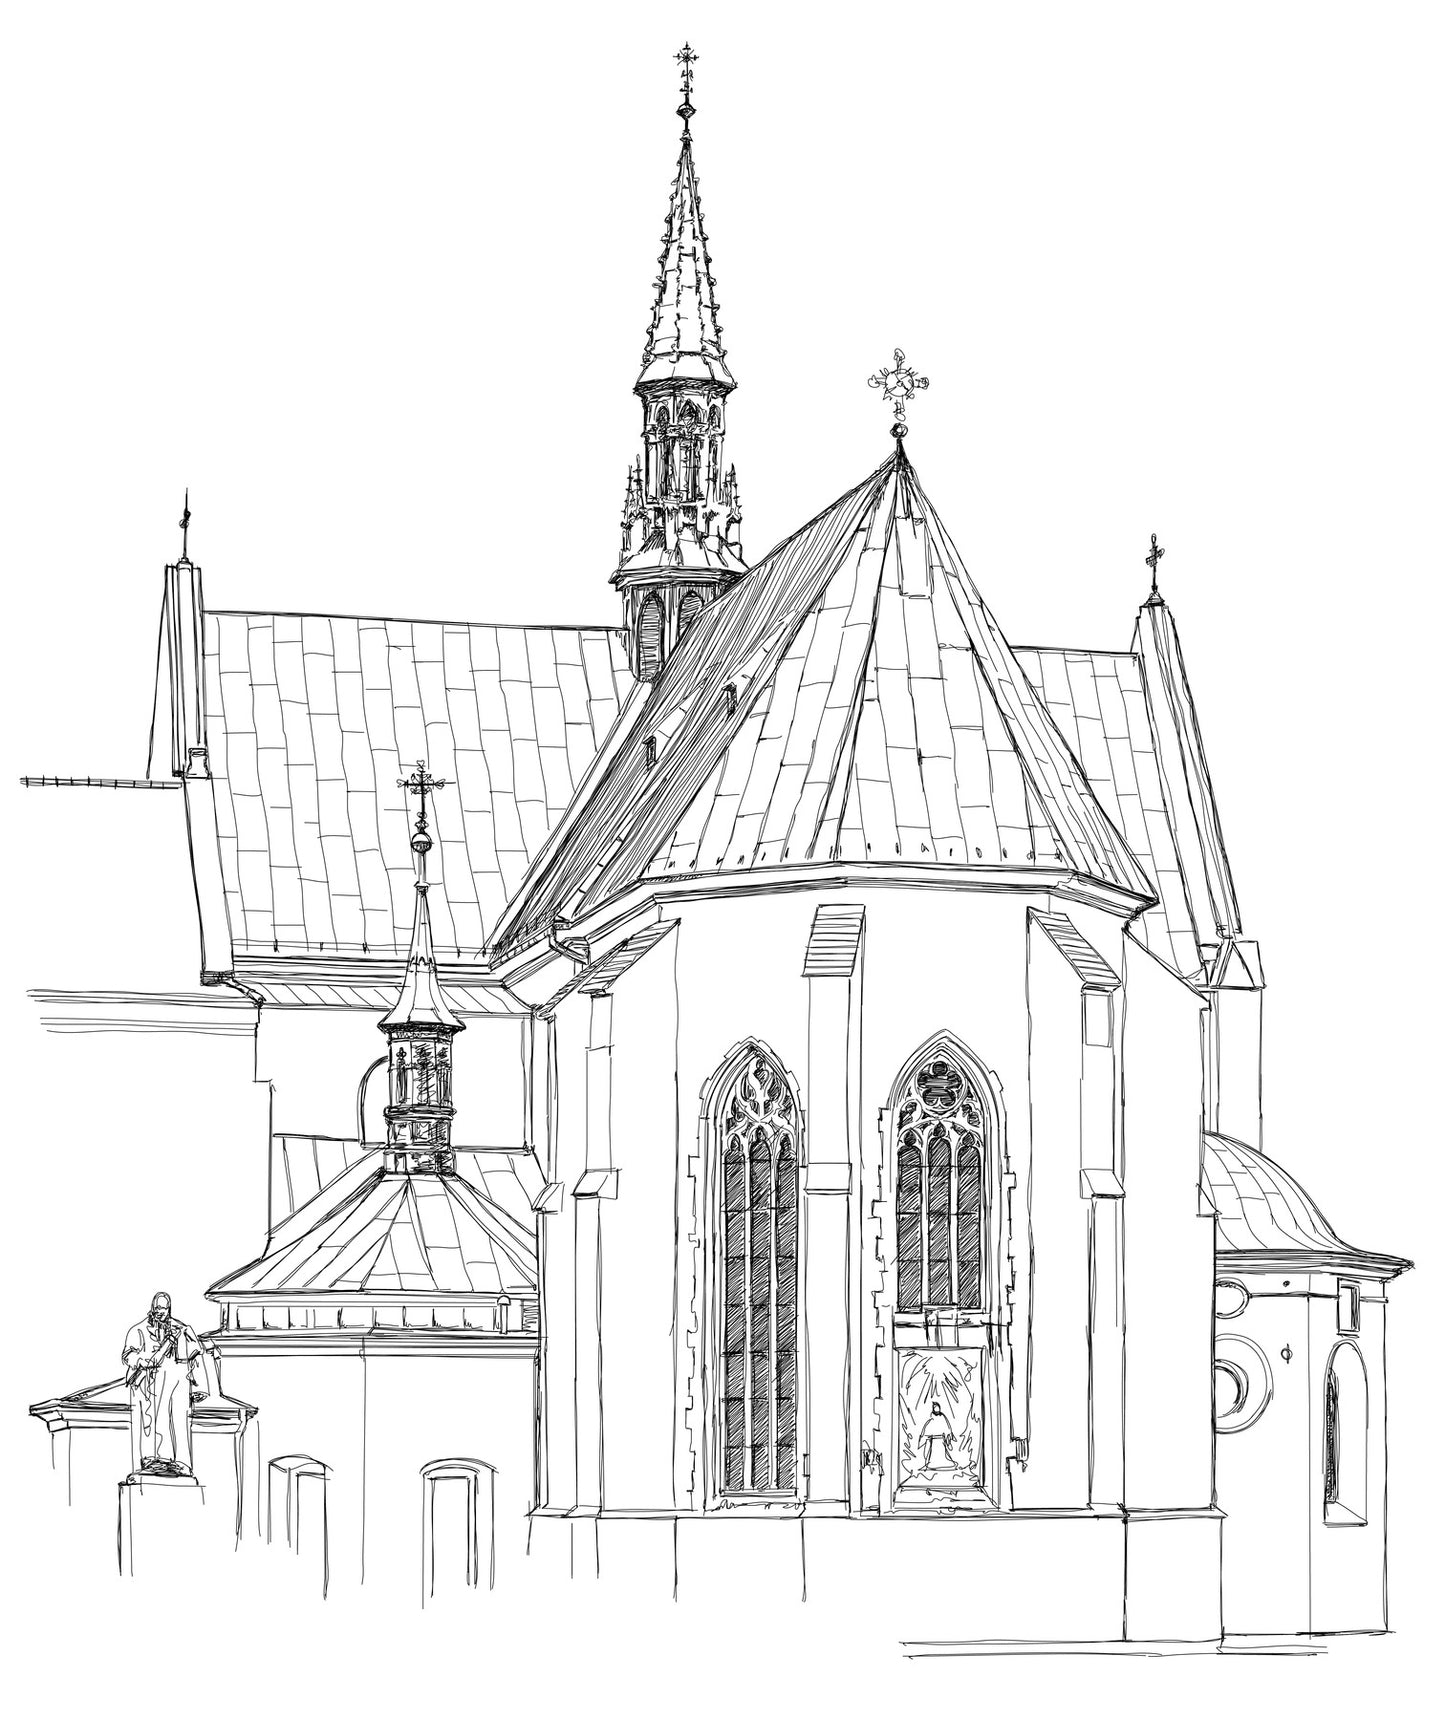 Krakow Beauty - Coloring Book With Poland Architecture, Landmarks & Monuments Sketches 